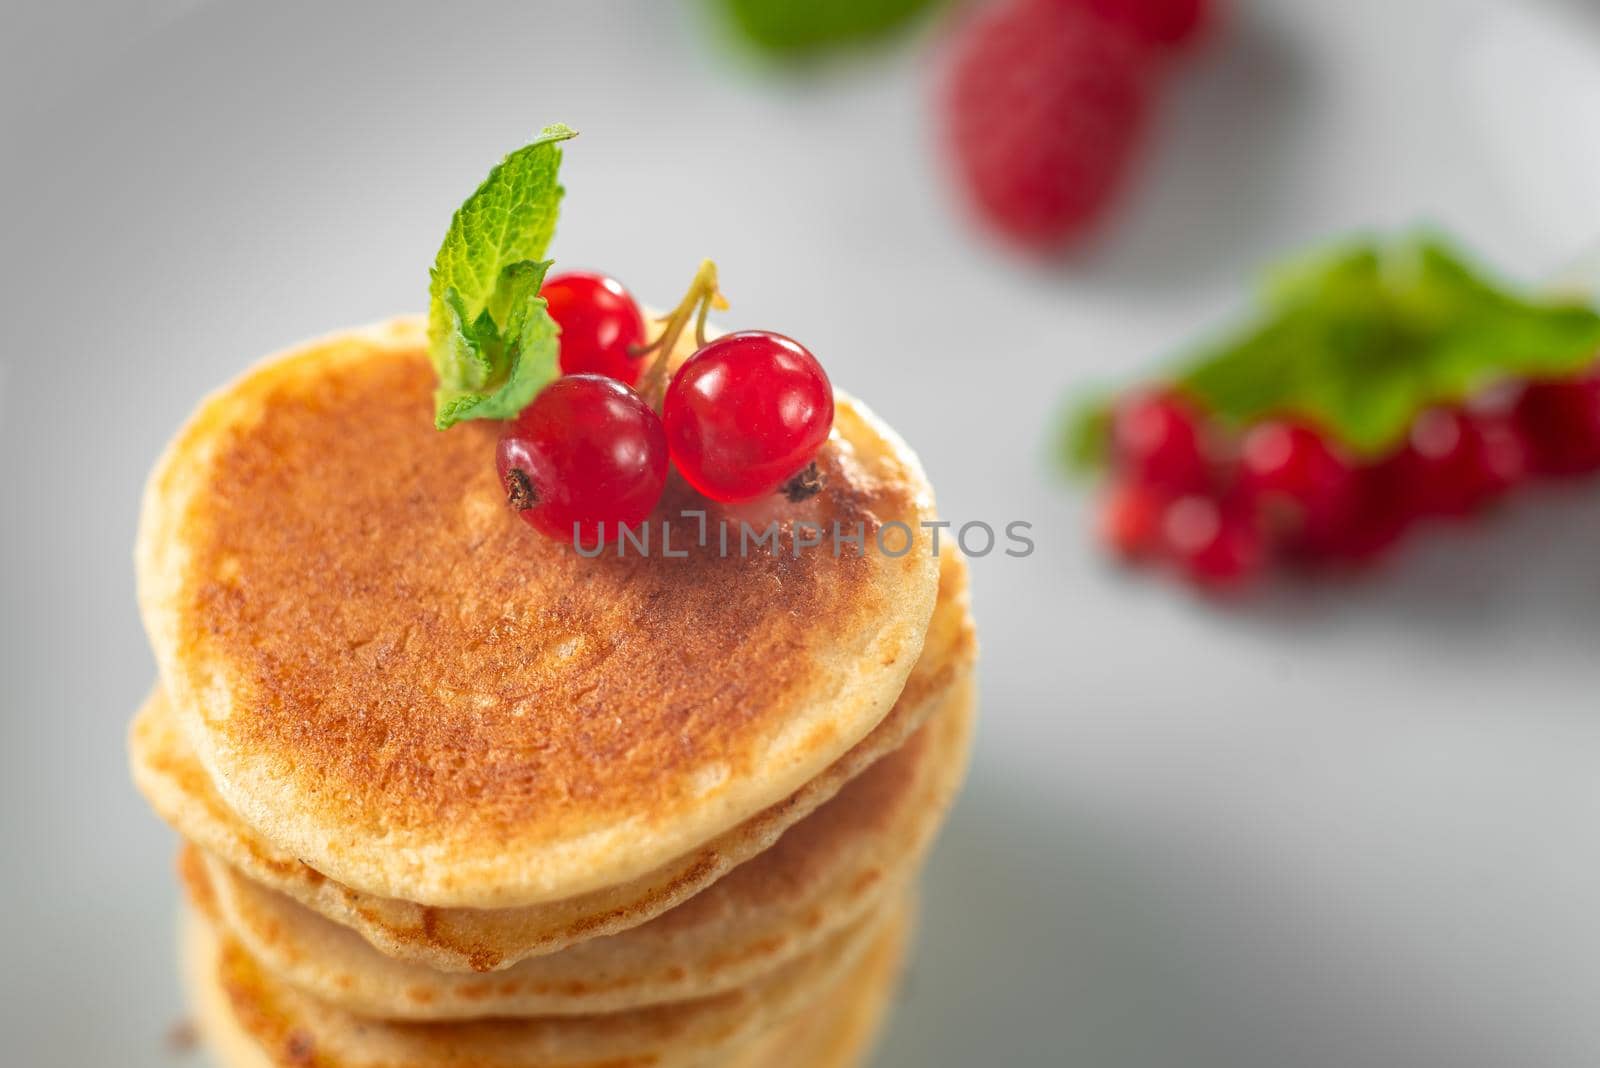 Food for breakfast healthy eating. Pancakes without butter with berries. Food for vegetarians and for dieting. American Pancakes Mini. Mini pancakes with blueberries and raspberries. American breakfast on a dark background. Healthy eating for the whole family. Homemade pancakes with berries.